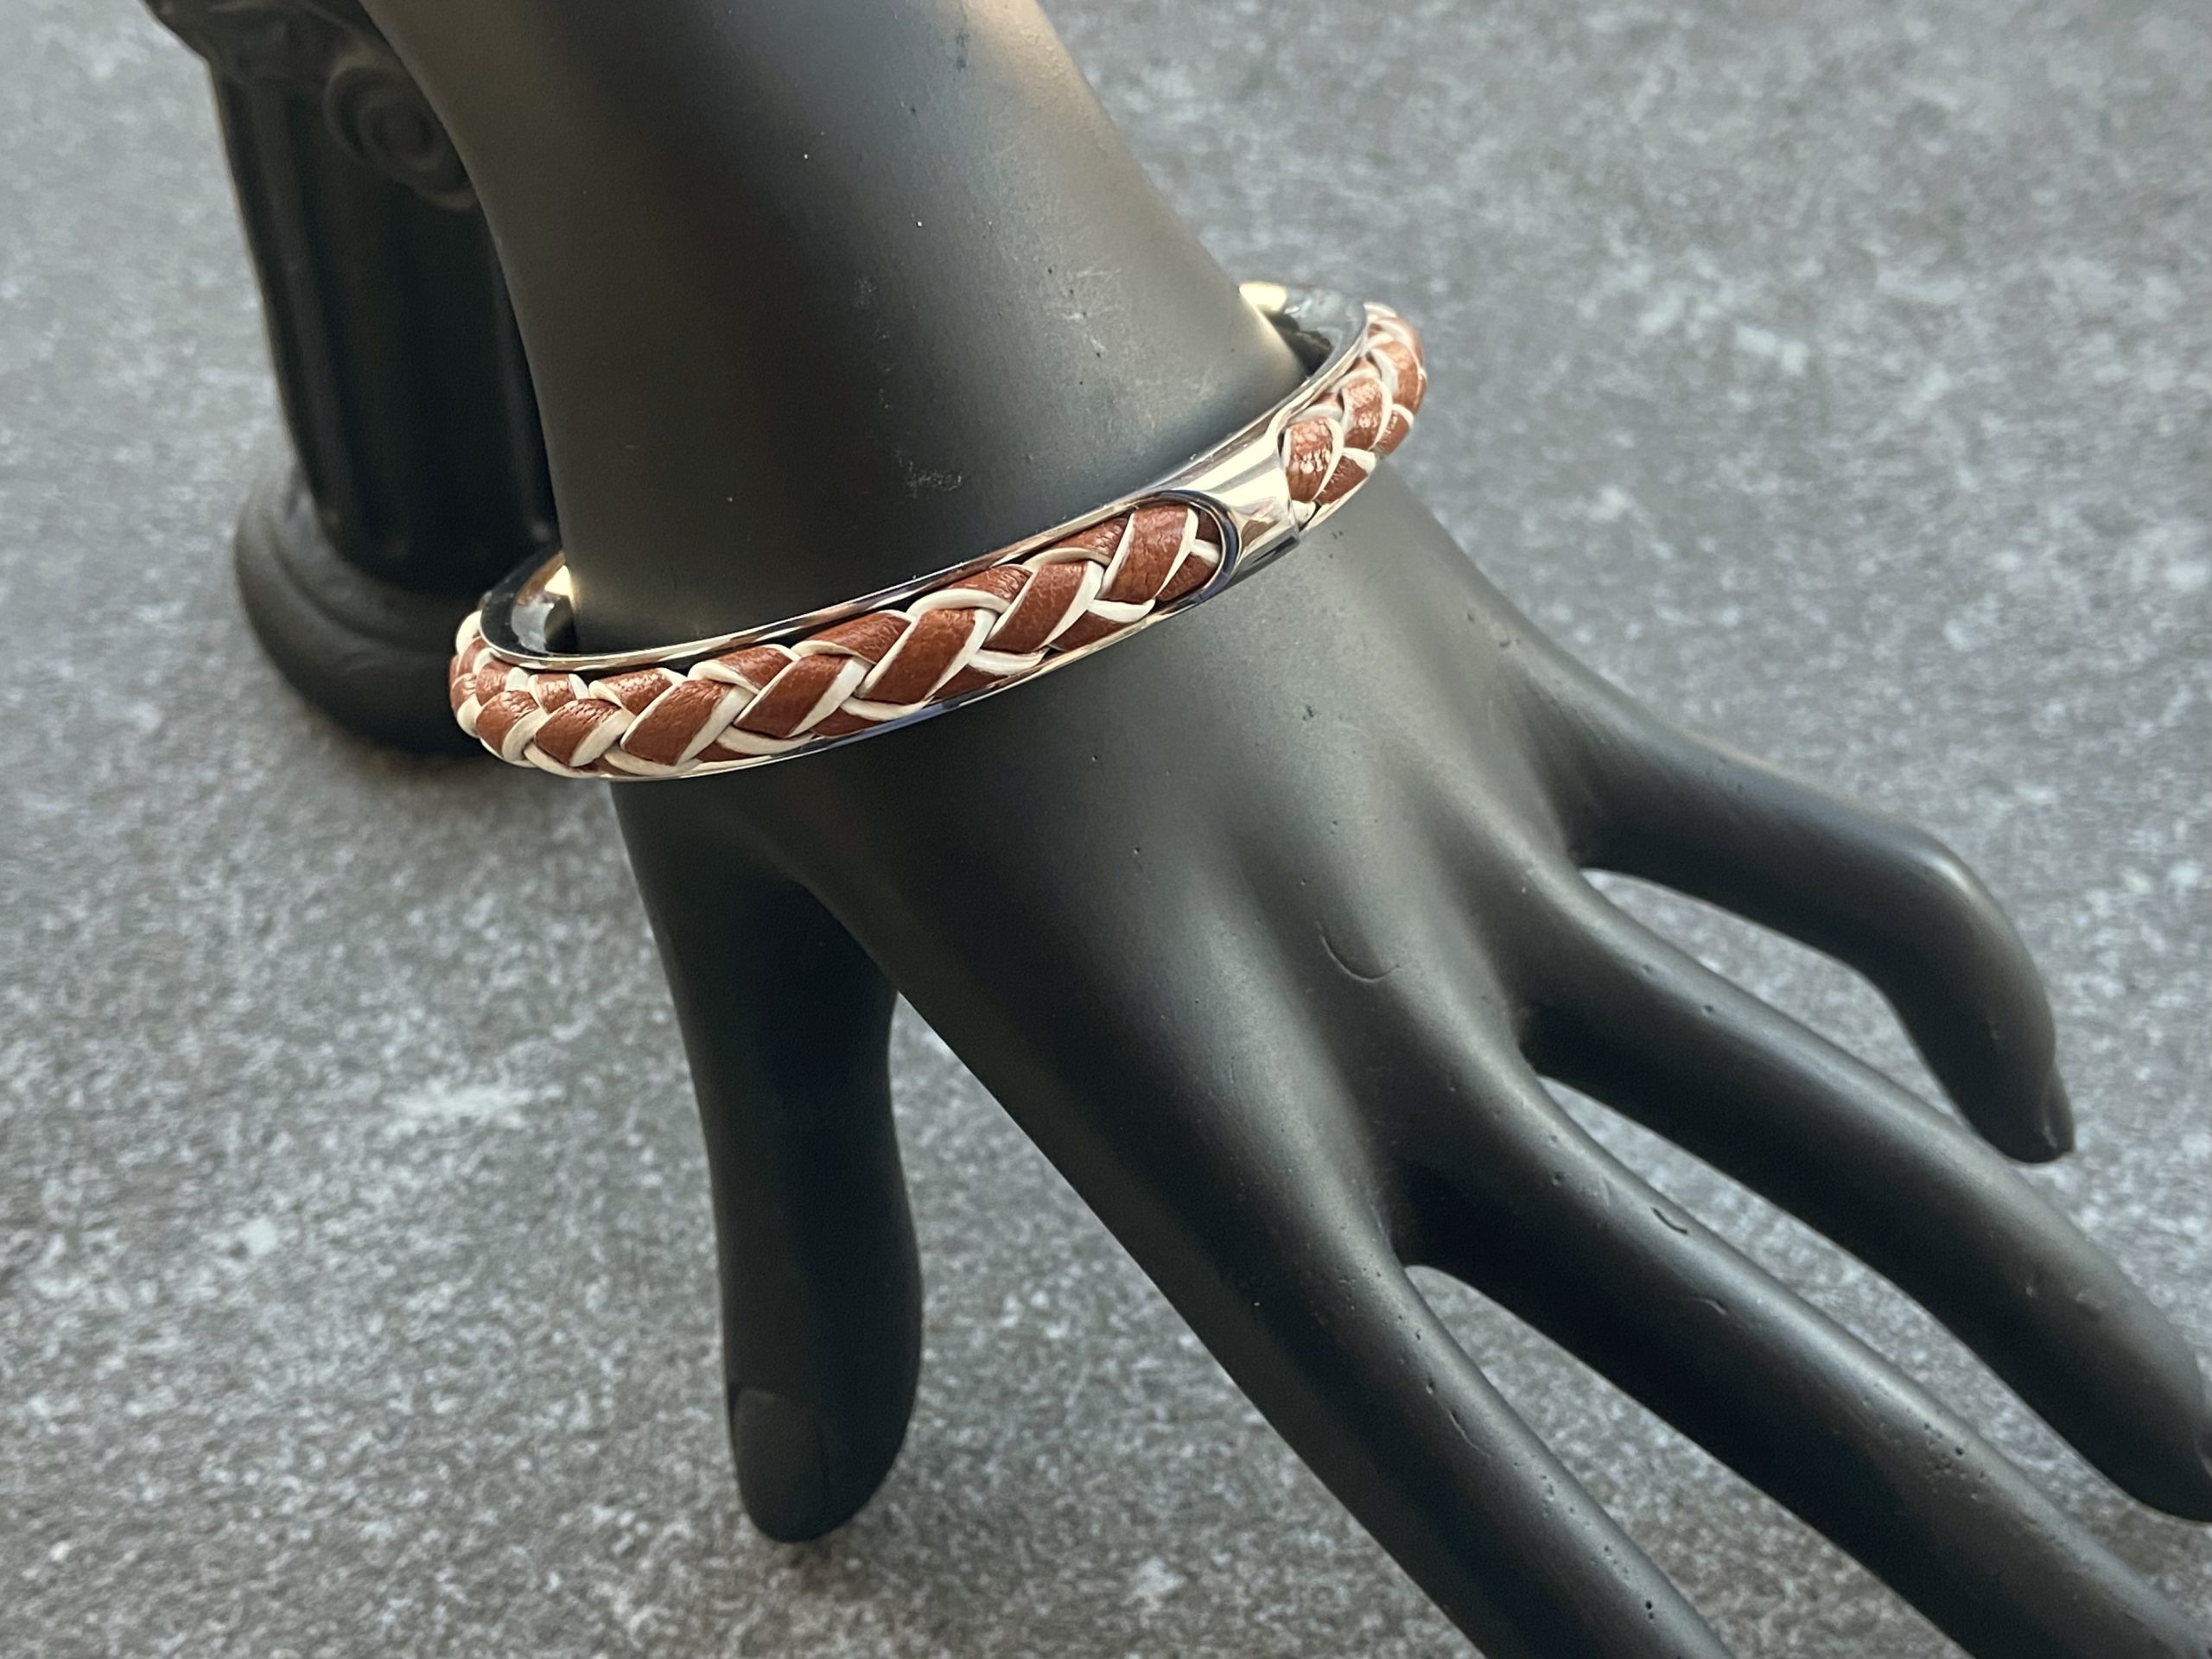 Leather and steel bracelet